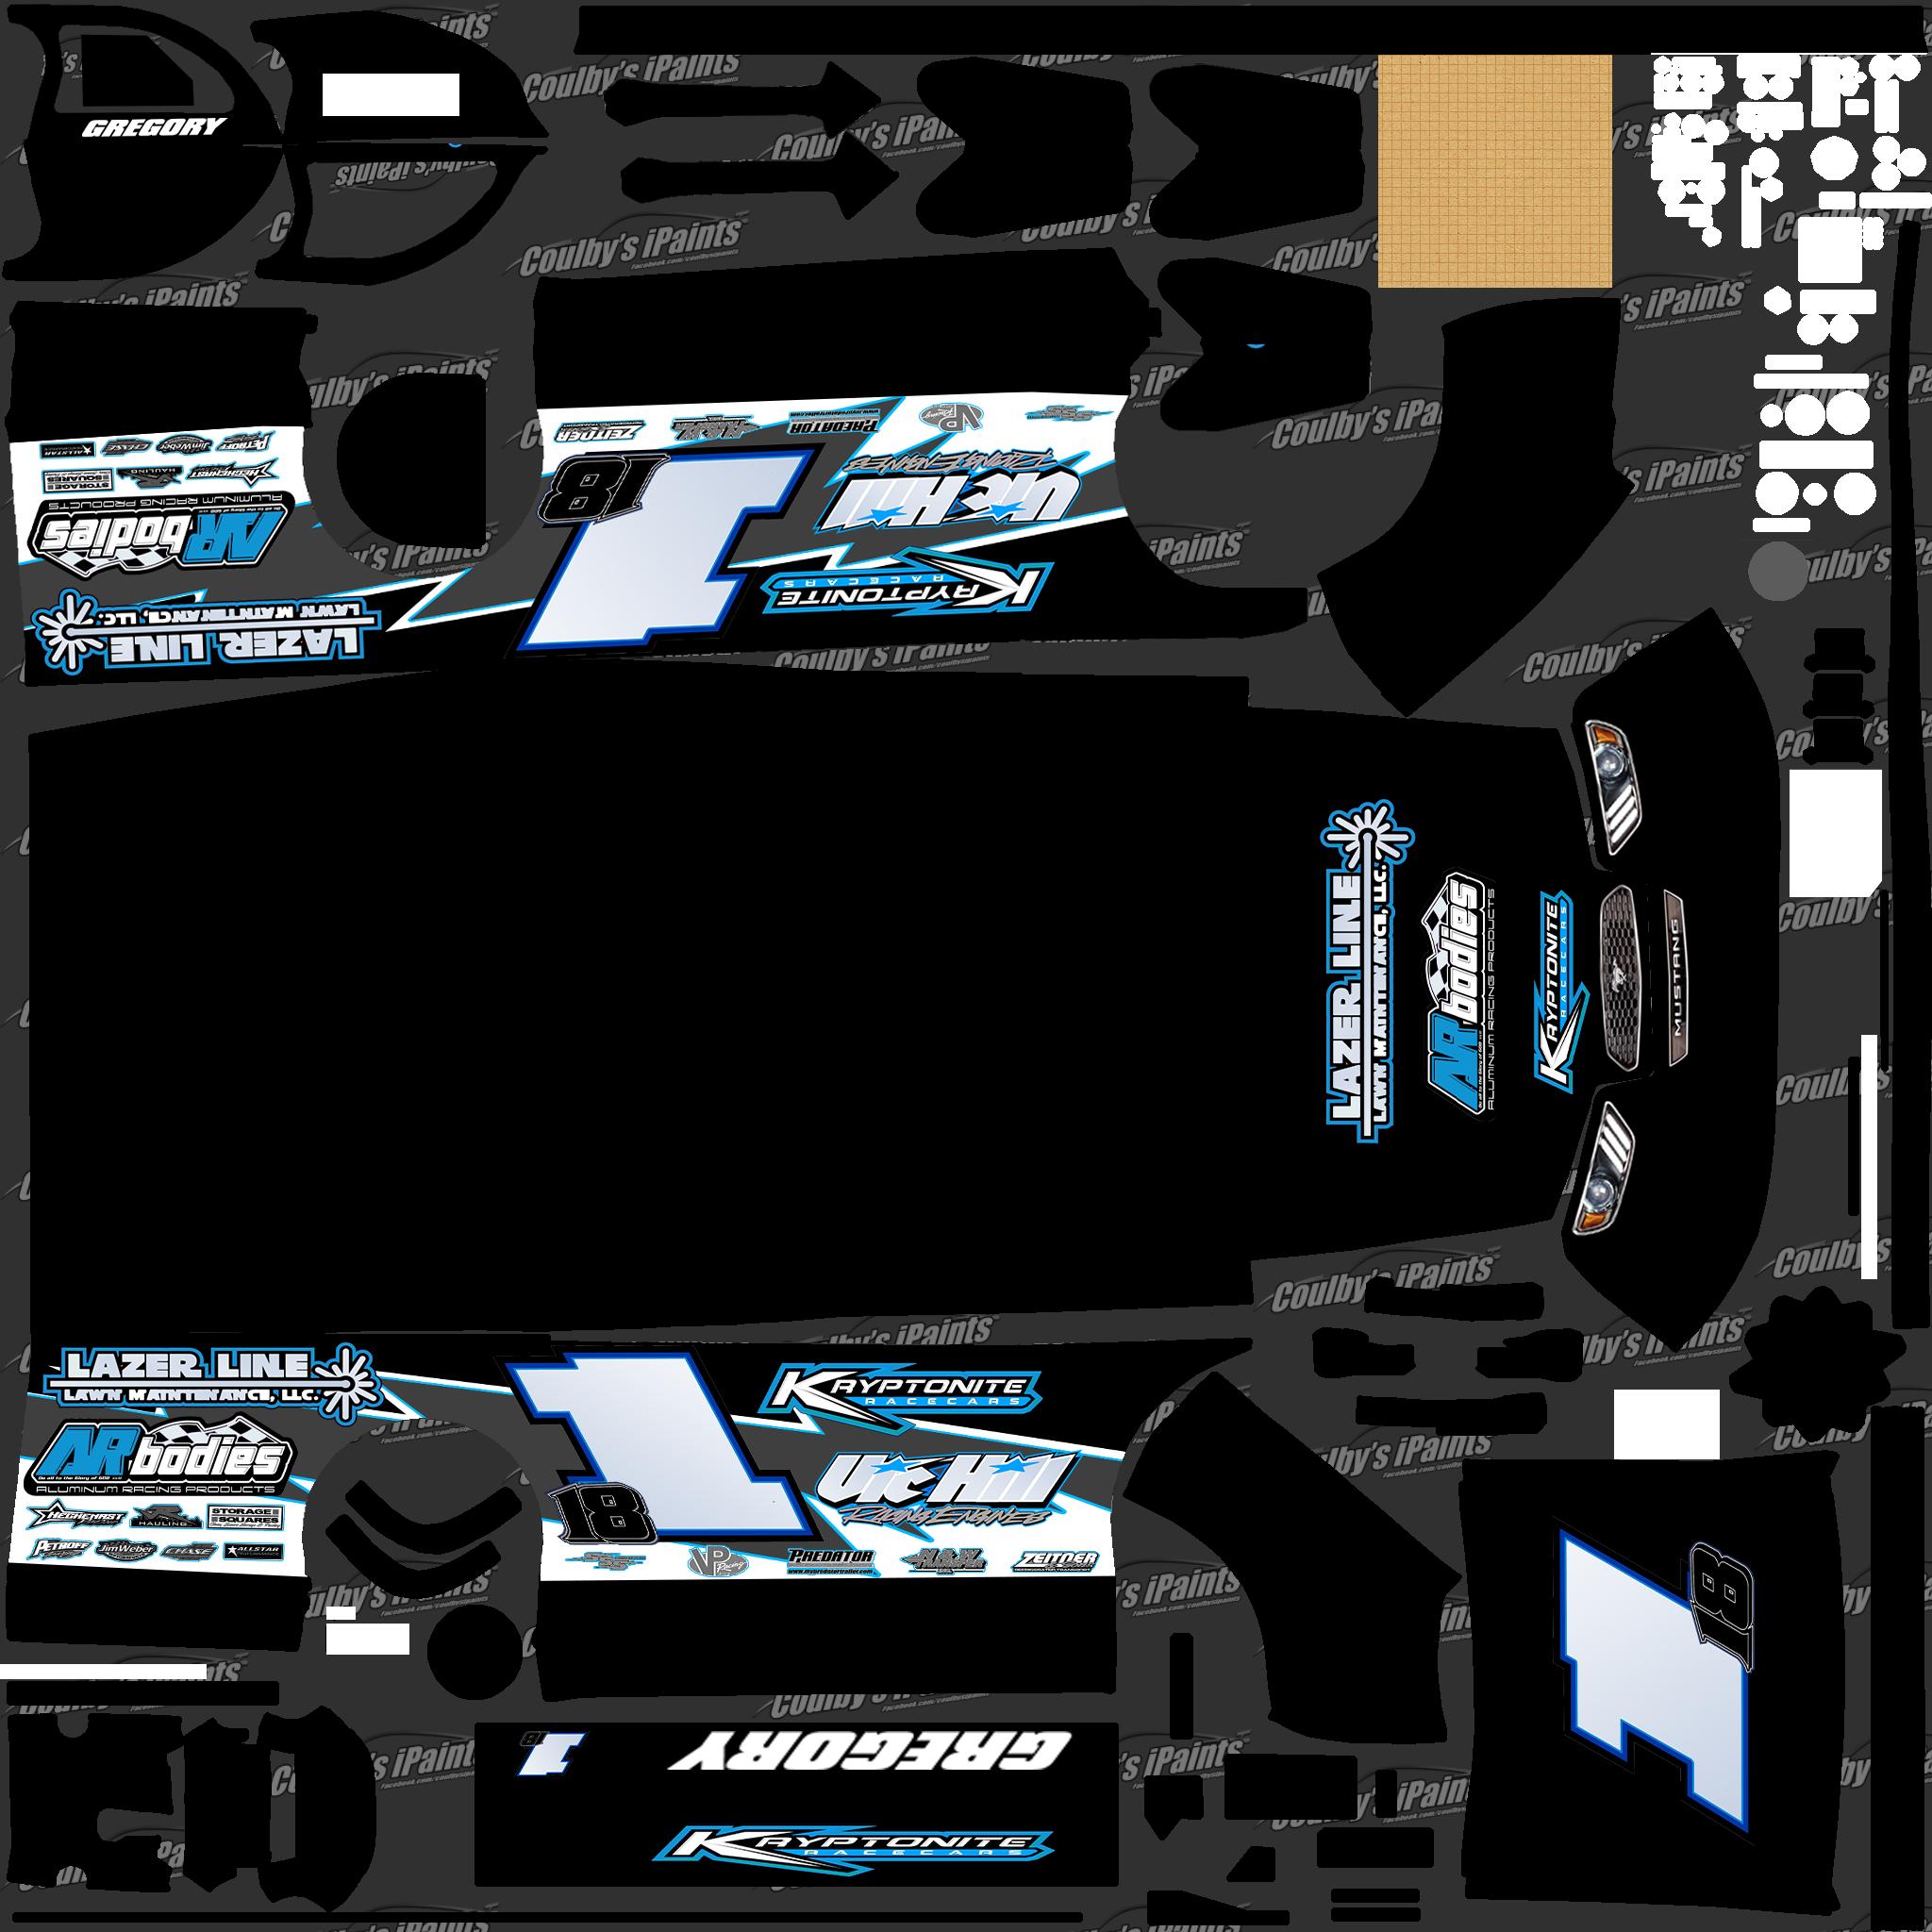 dirt-late-model-coulbys-ipaints-smart-template-6-gregoiry-team-1-design-wrap-by-josh-oliver